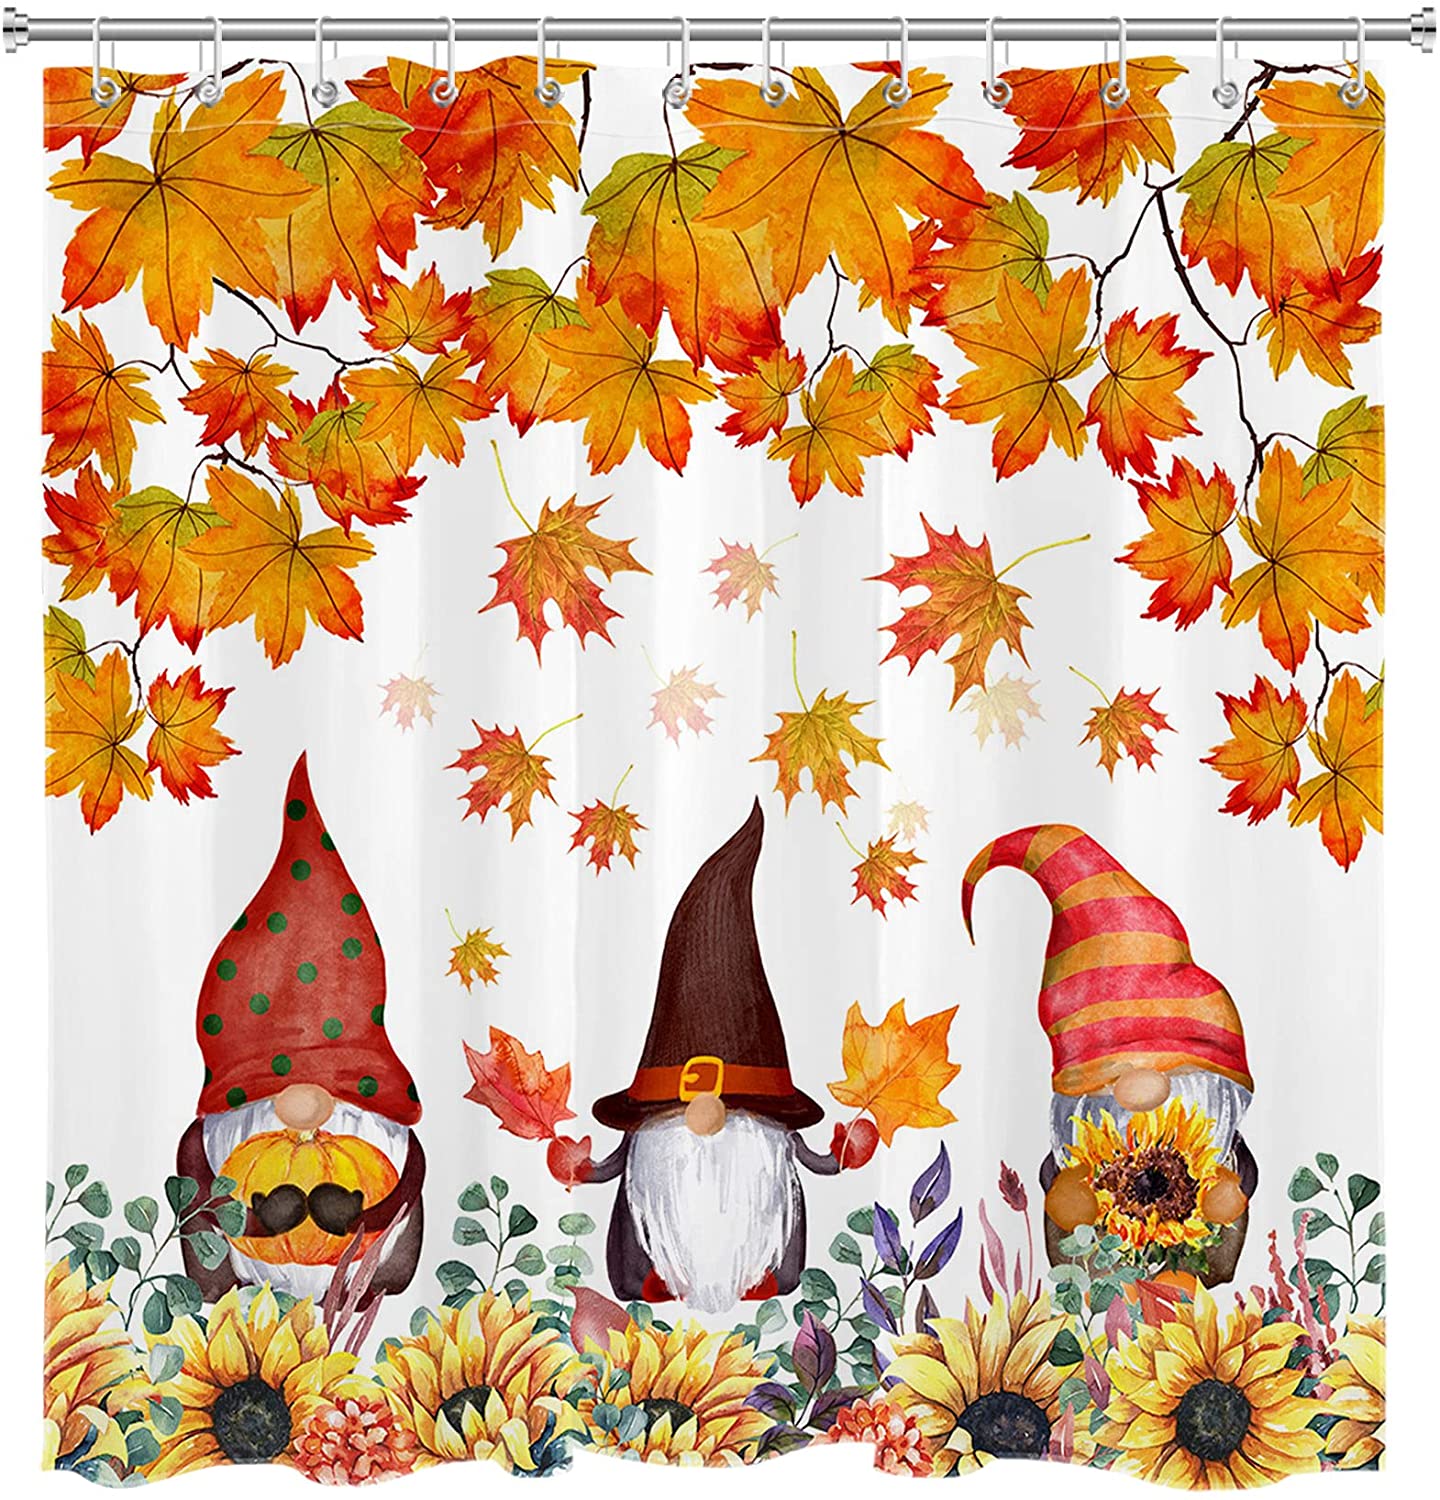 Autumn Scenery Golden Maple Leaves Sunflowers Three Gnomes Shower Curtain